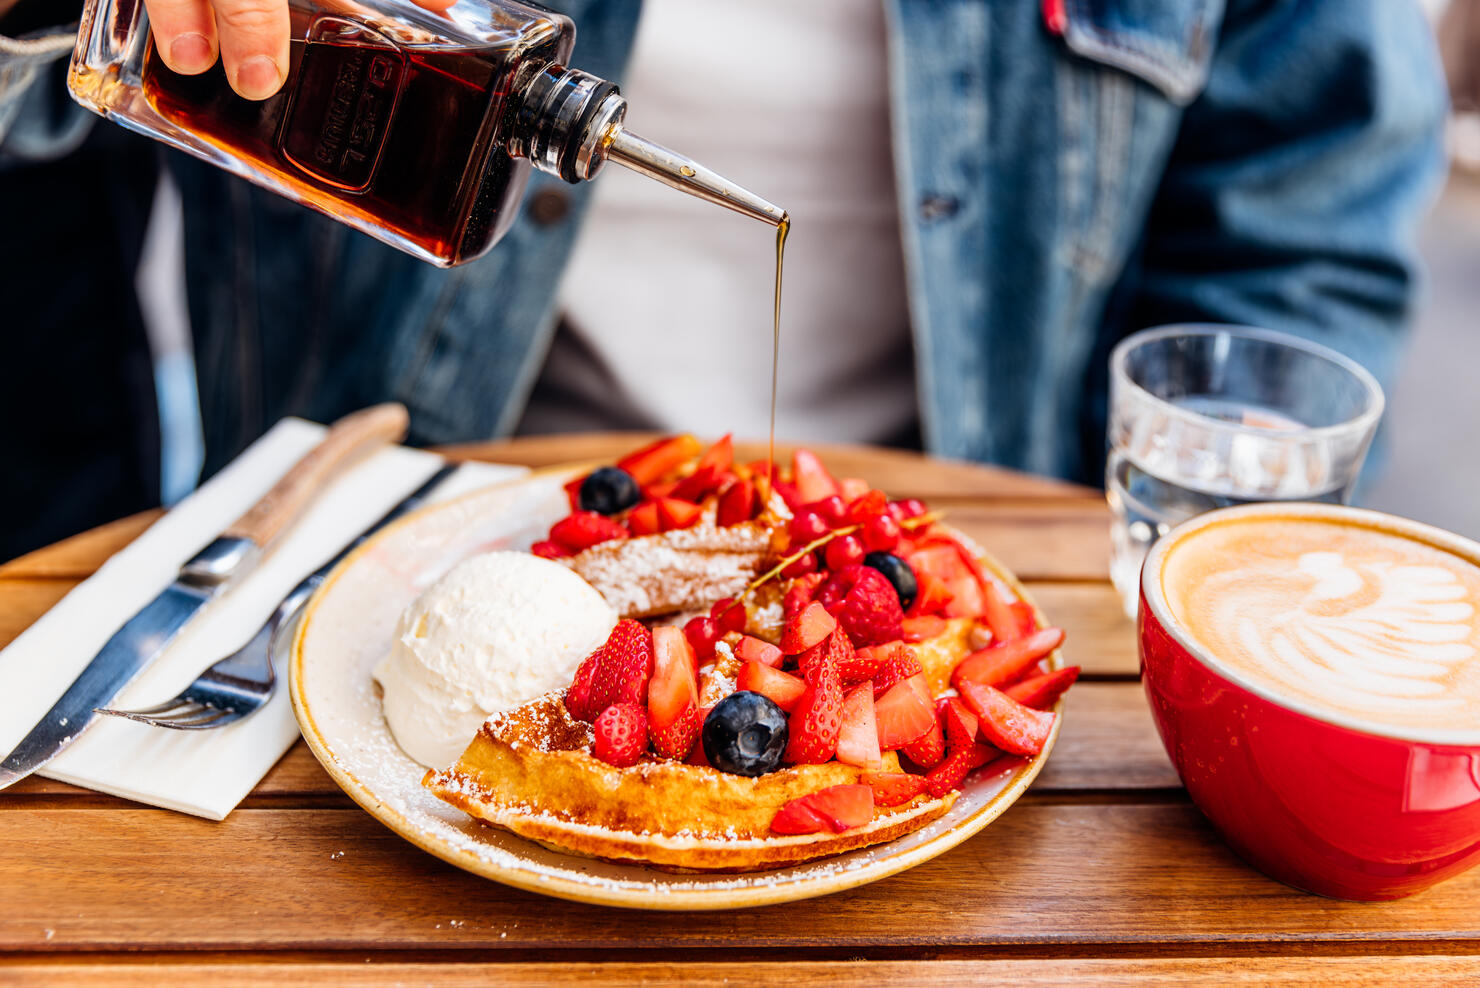 Man pouring maple syrup on waffles with fresh berries and ice cream